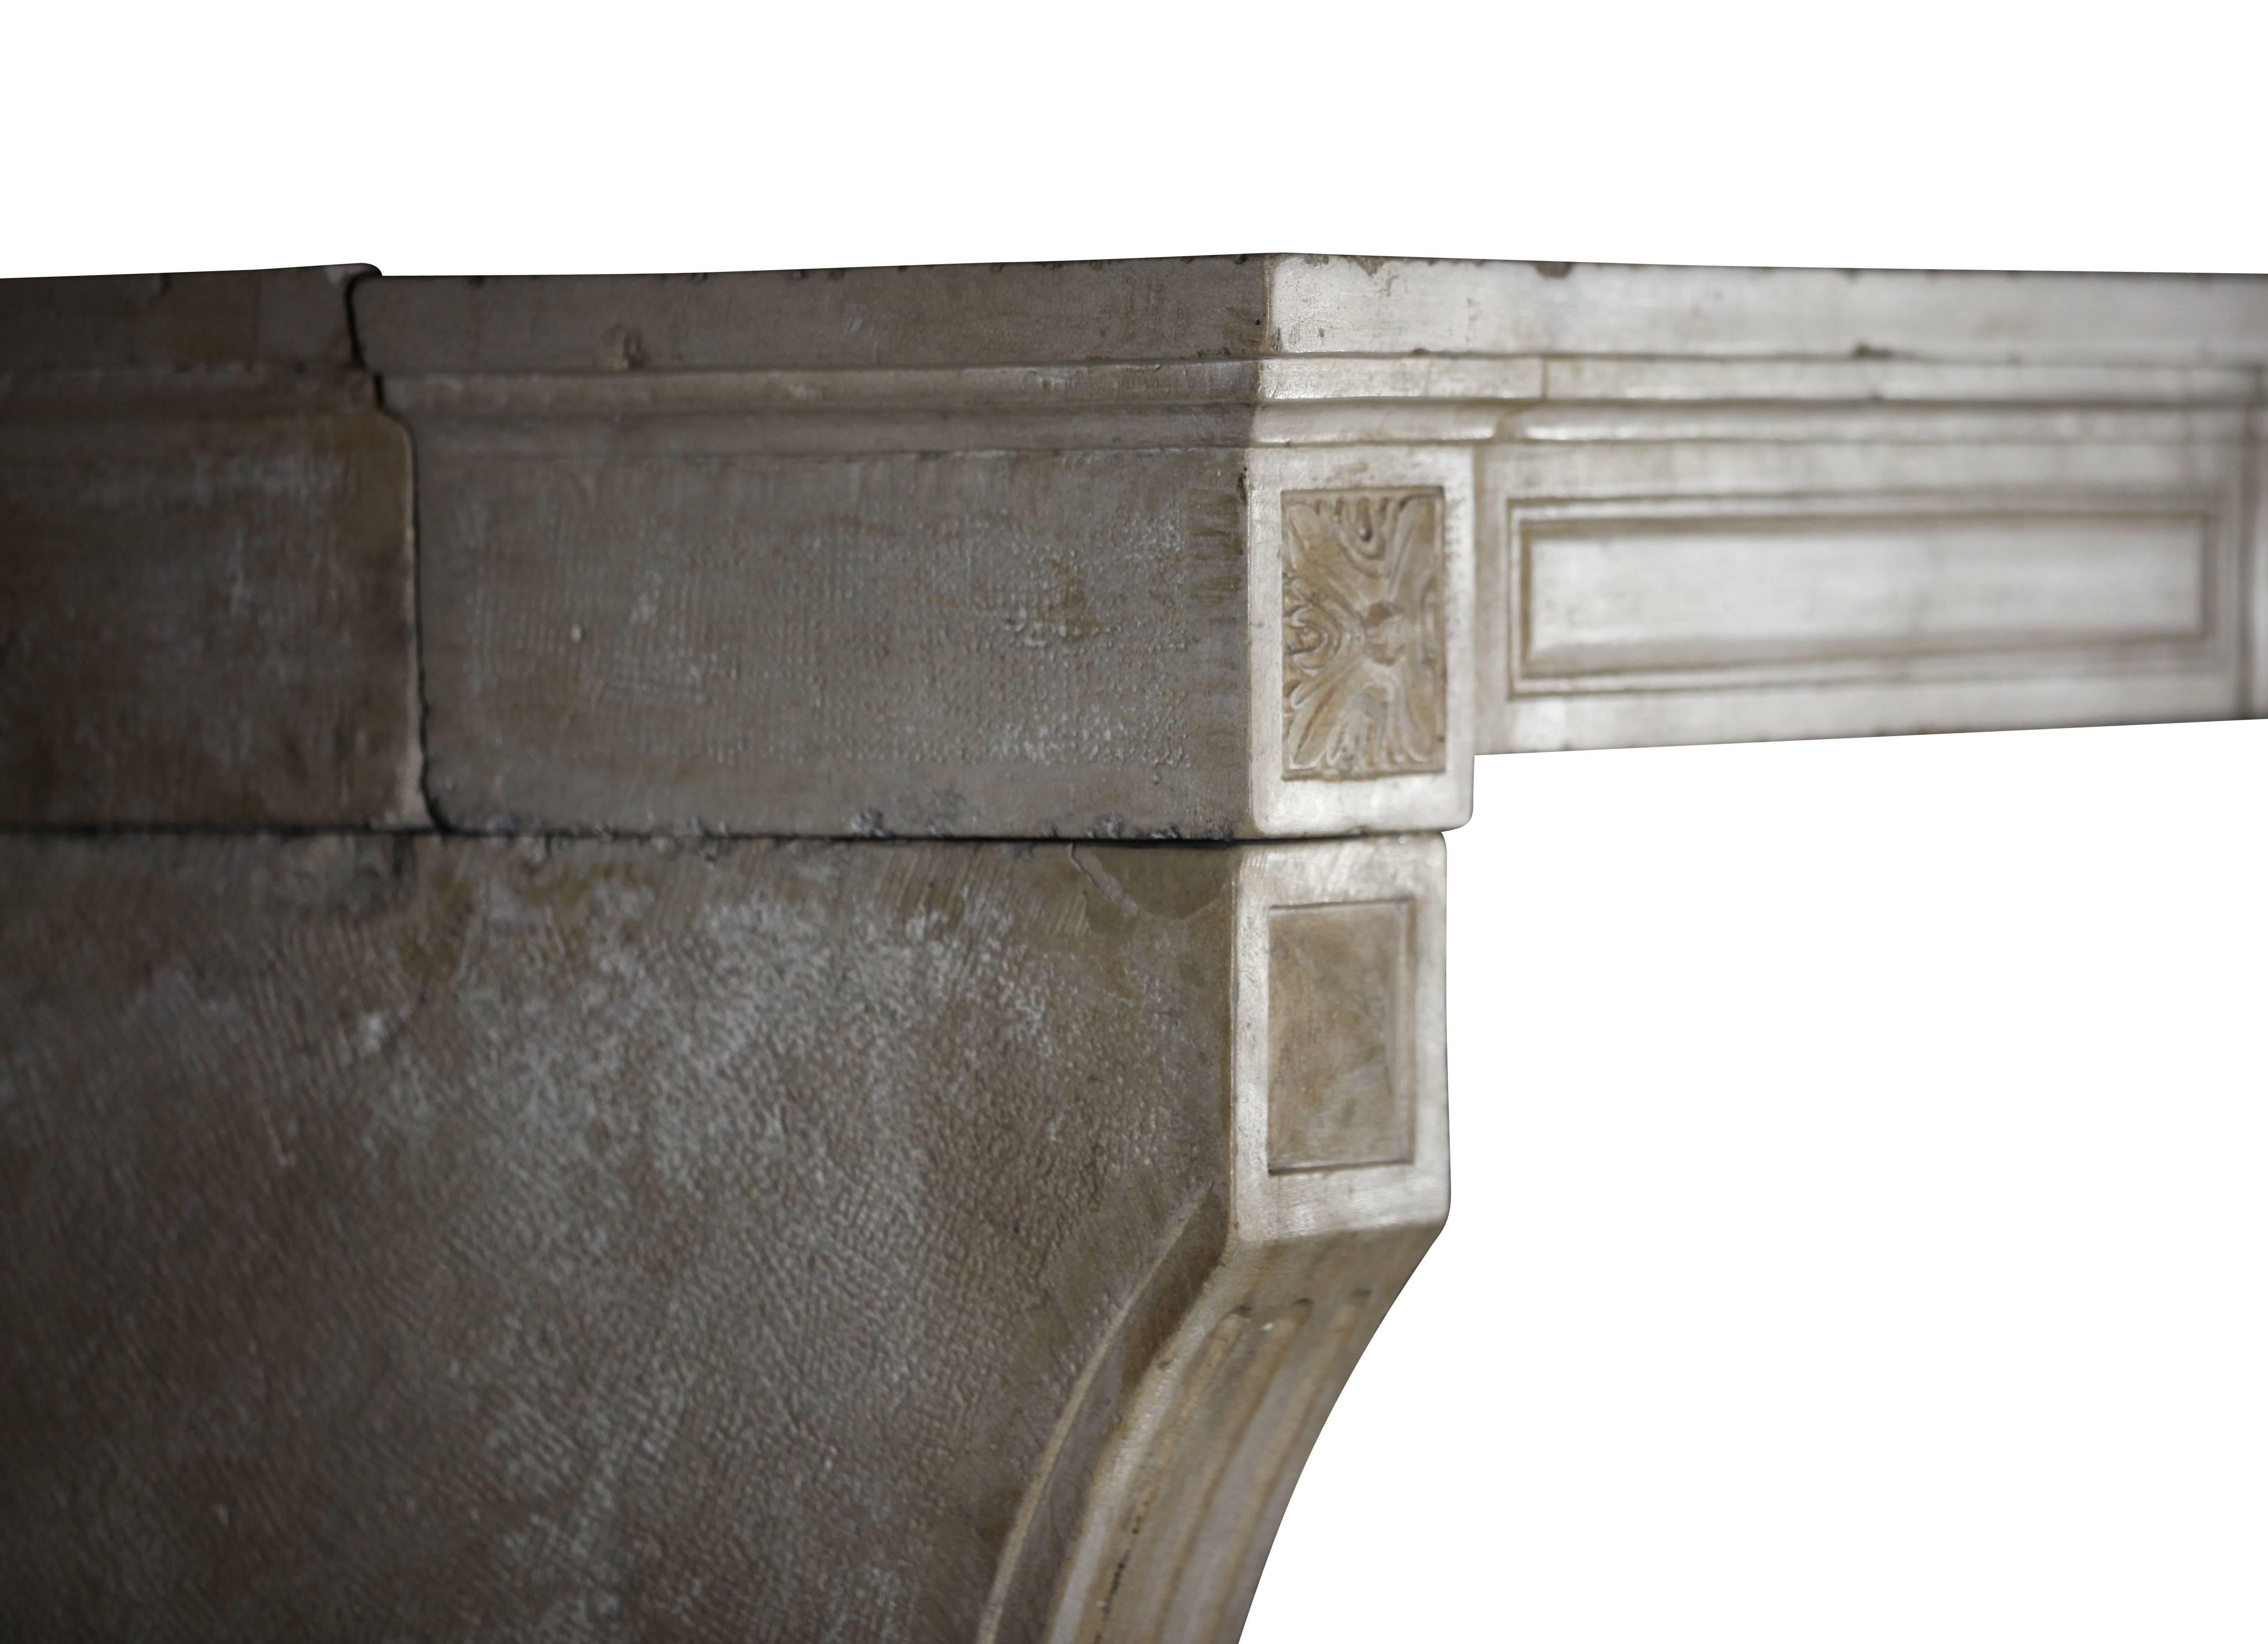 This nice original antique fireplace surround in limestone with fruit detail in the center and diamond point detail on the legs is unique. Five solid blocks. There are some remains of the original patina. The ancient surfaces has a glossy